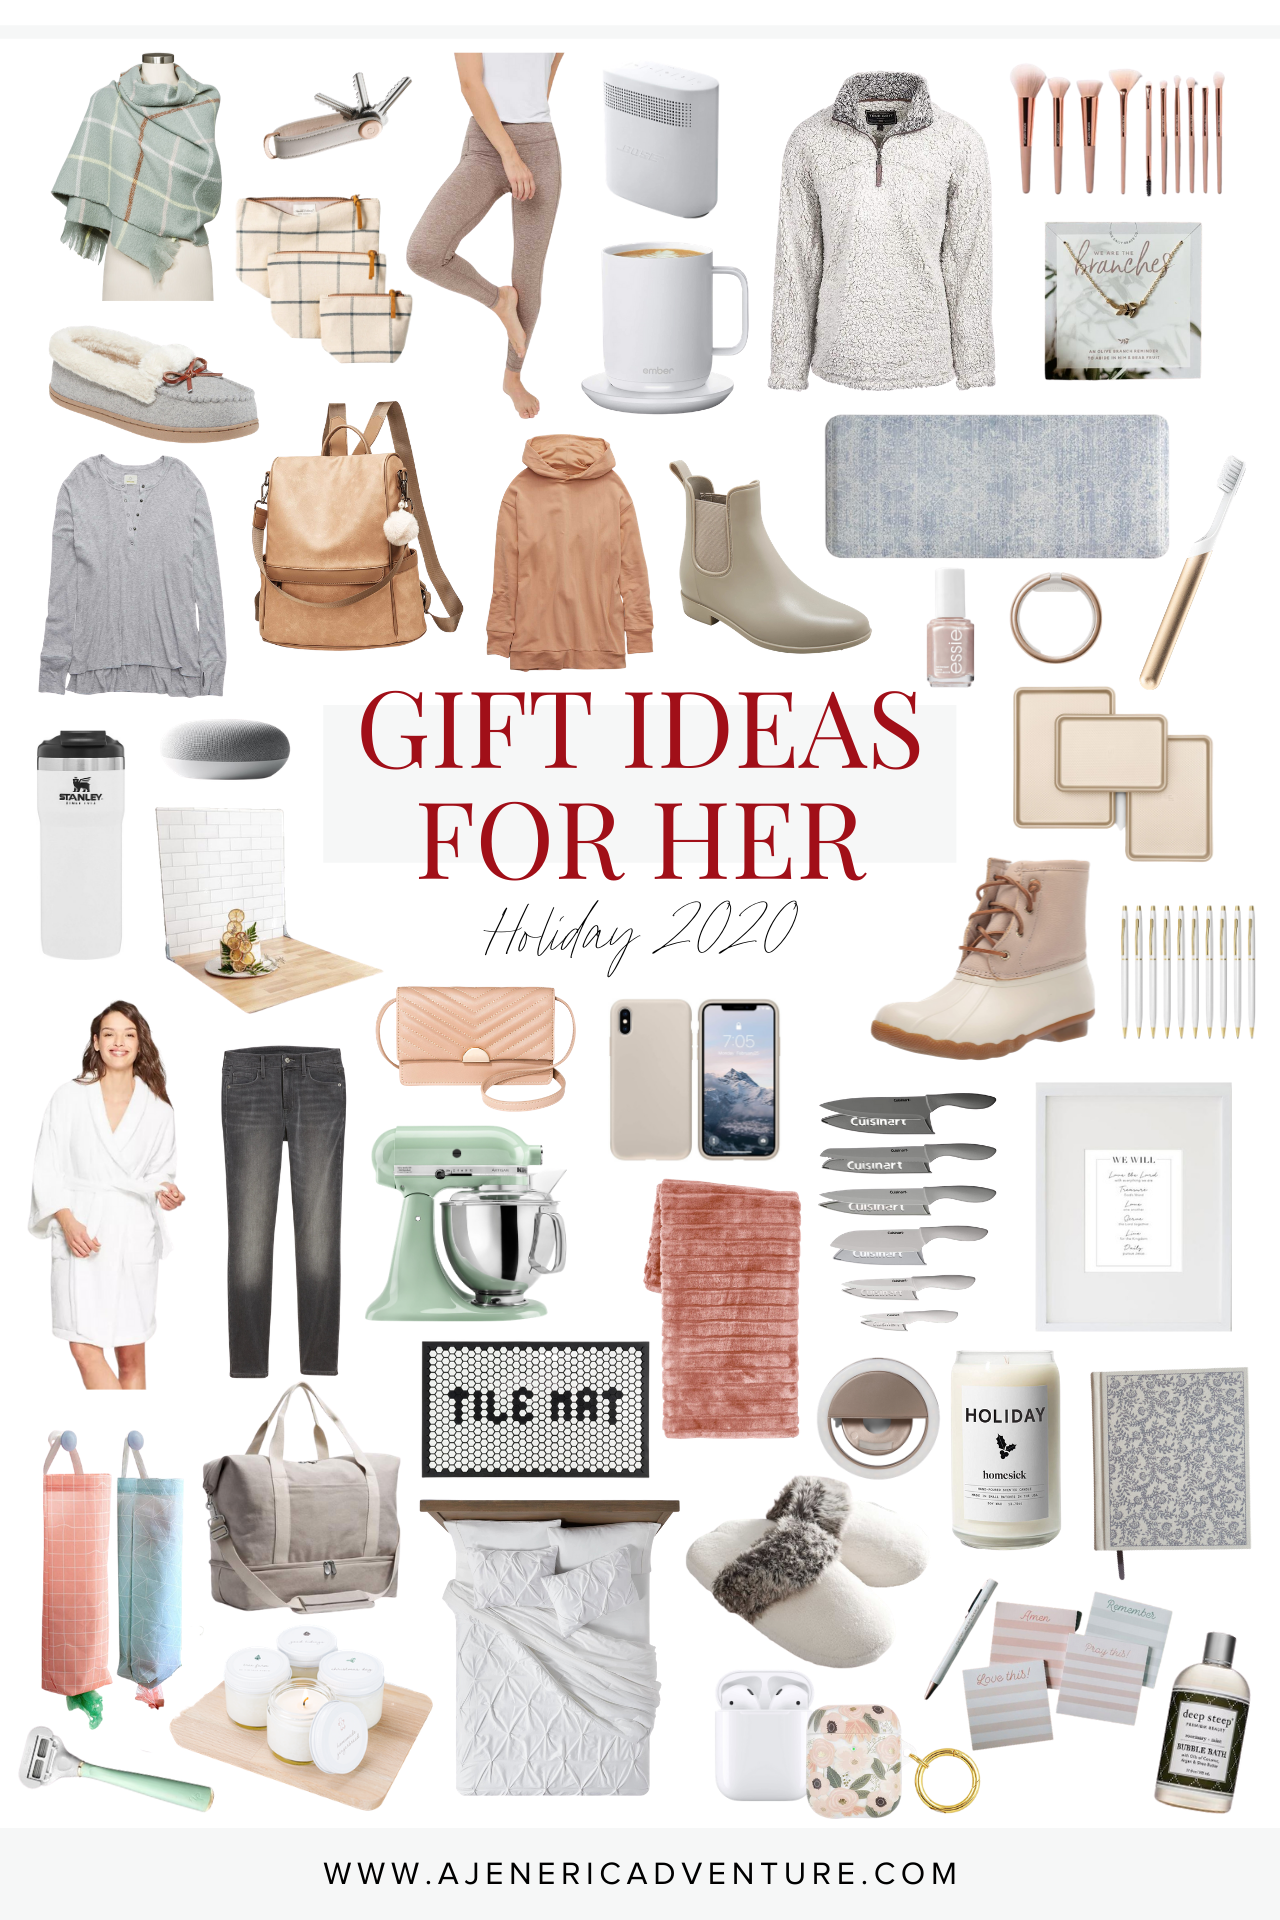 FUN & UNIQUE GIFT IDEAS FOR WOMEN STORY - Everyday Savvy-gemektower.com.vn